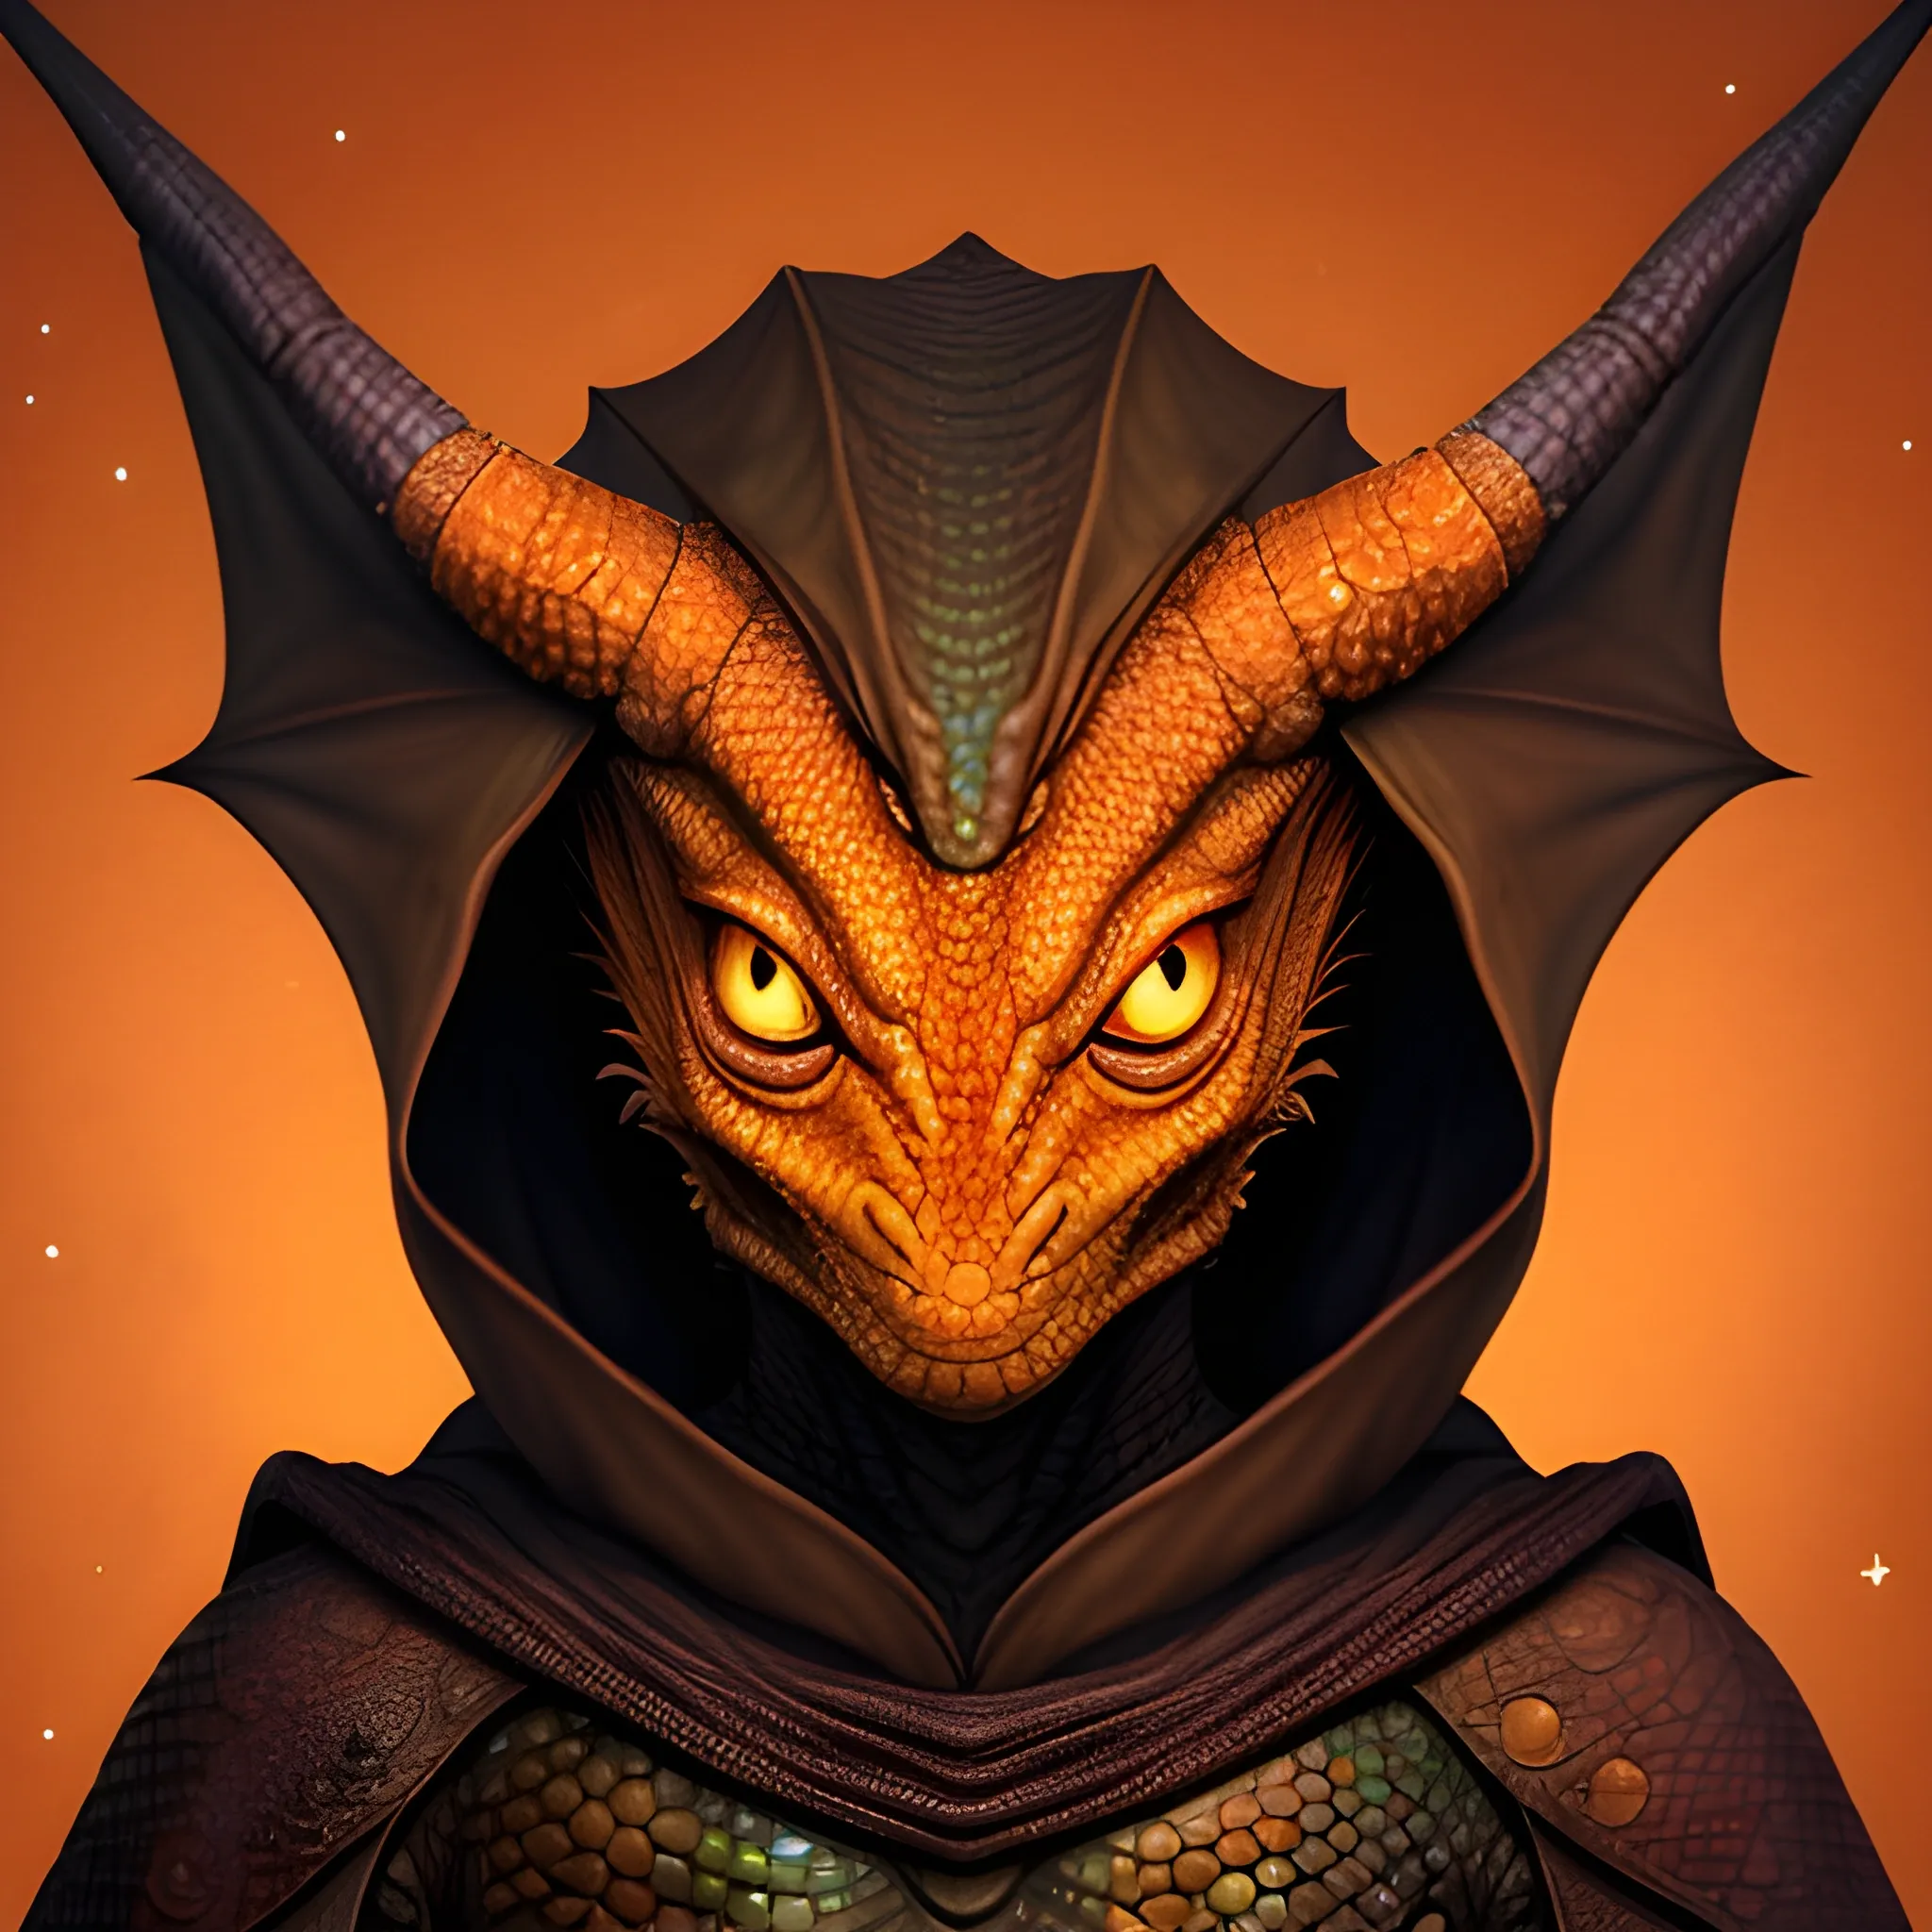 Humanoid dragon looking at the camera. He is orange-brown. He is wearing a simple cloak that has stars on it. He does not have horns, and has a more lizard like face. Fantasy